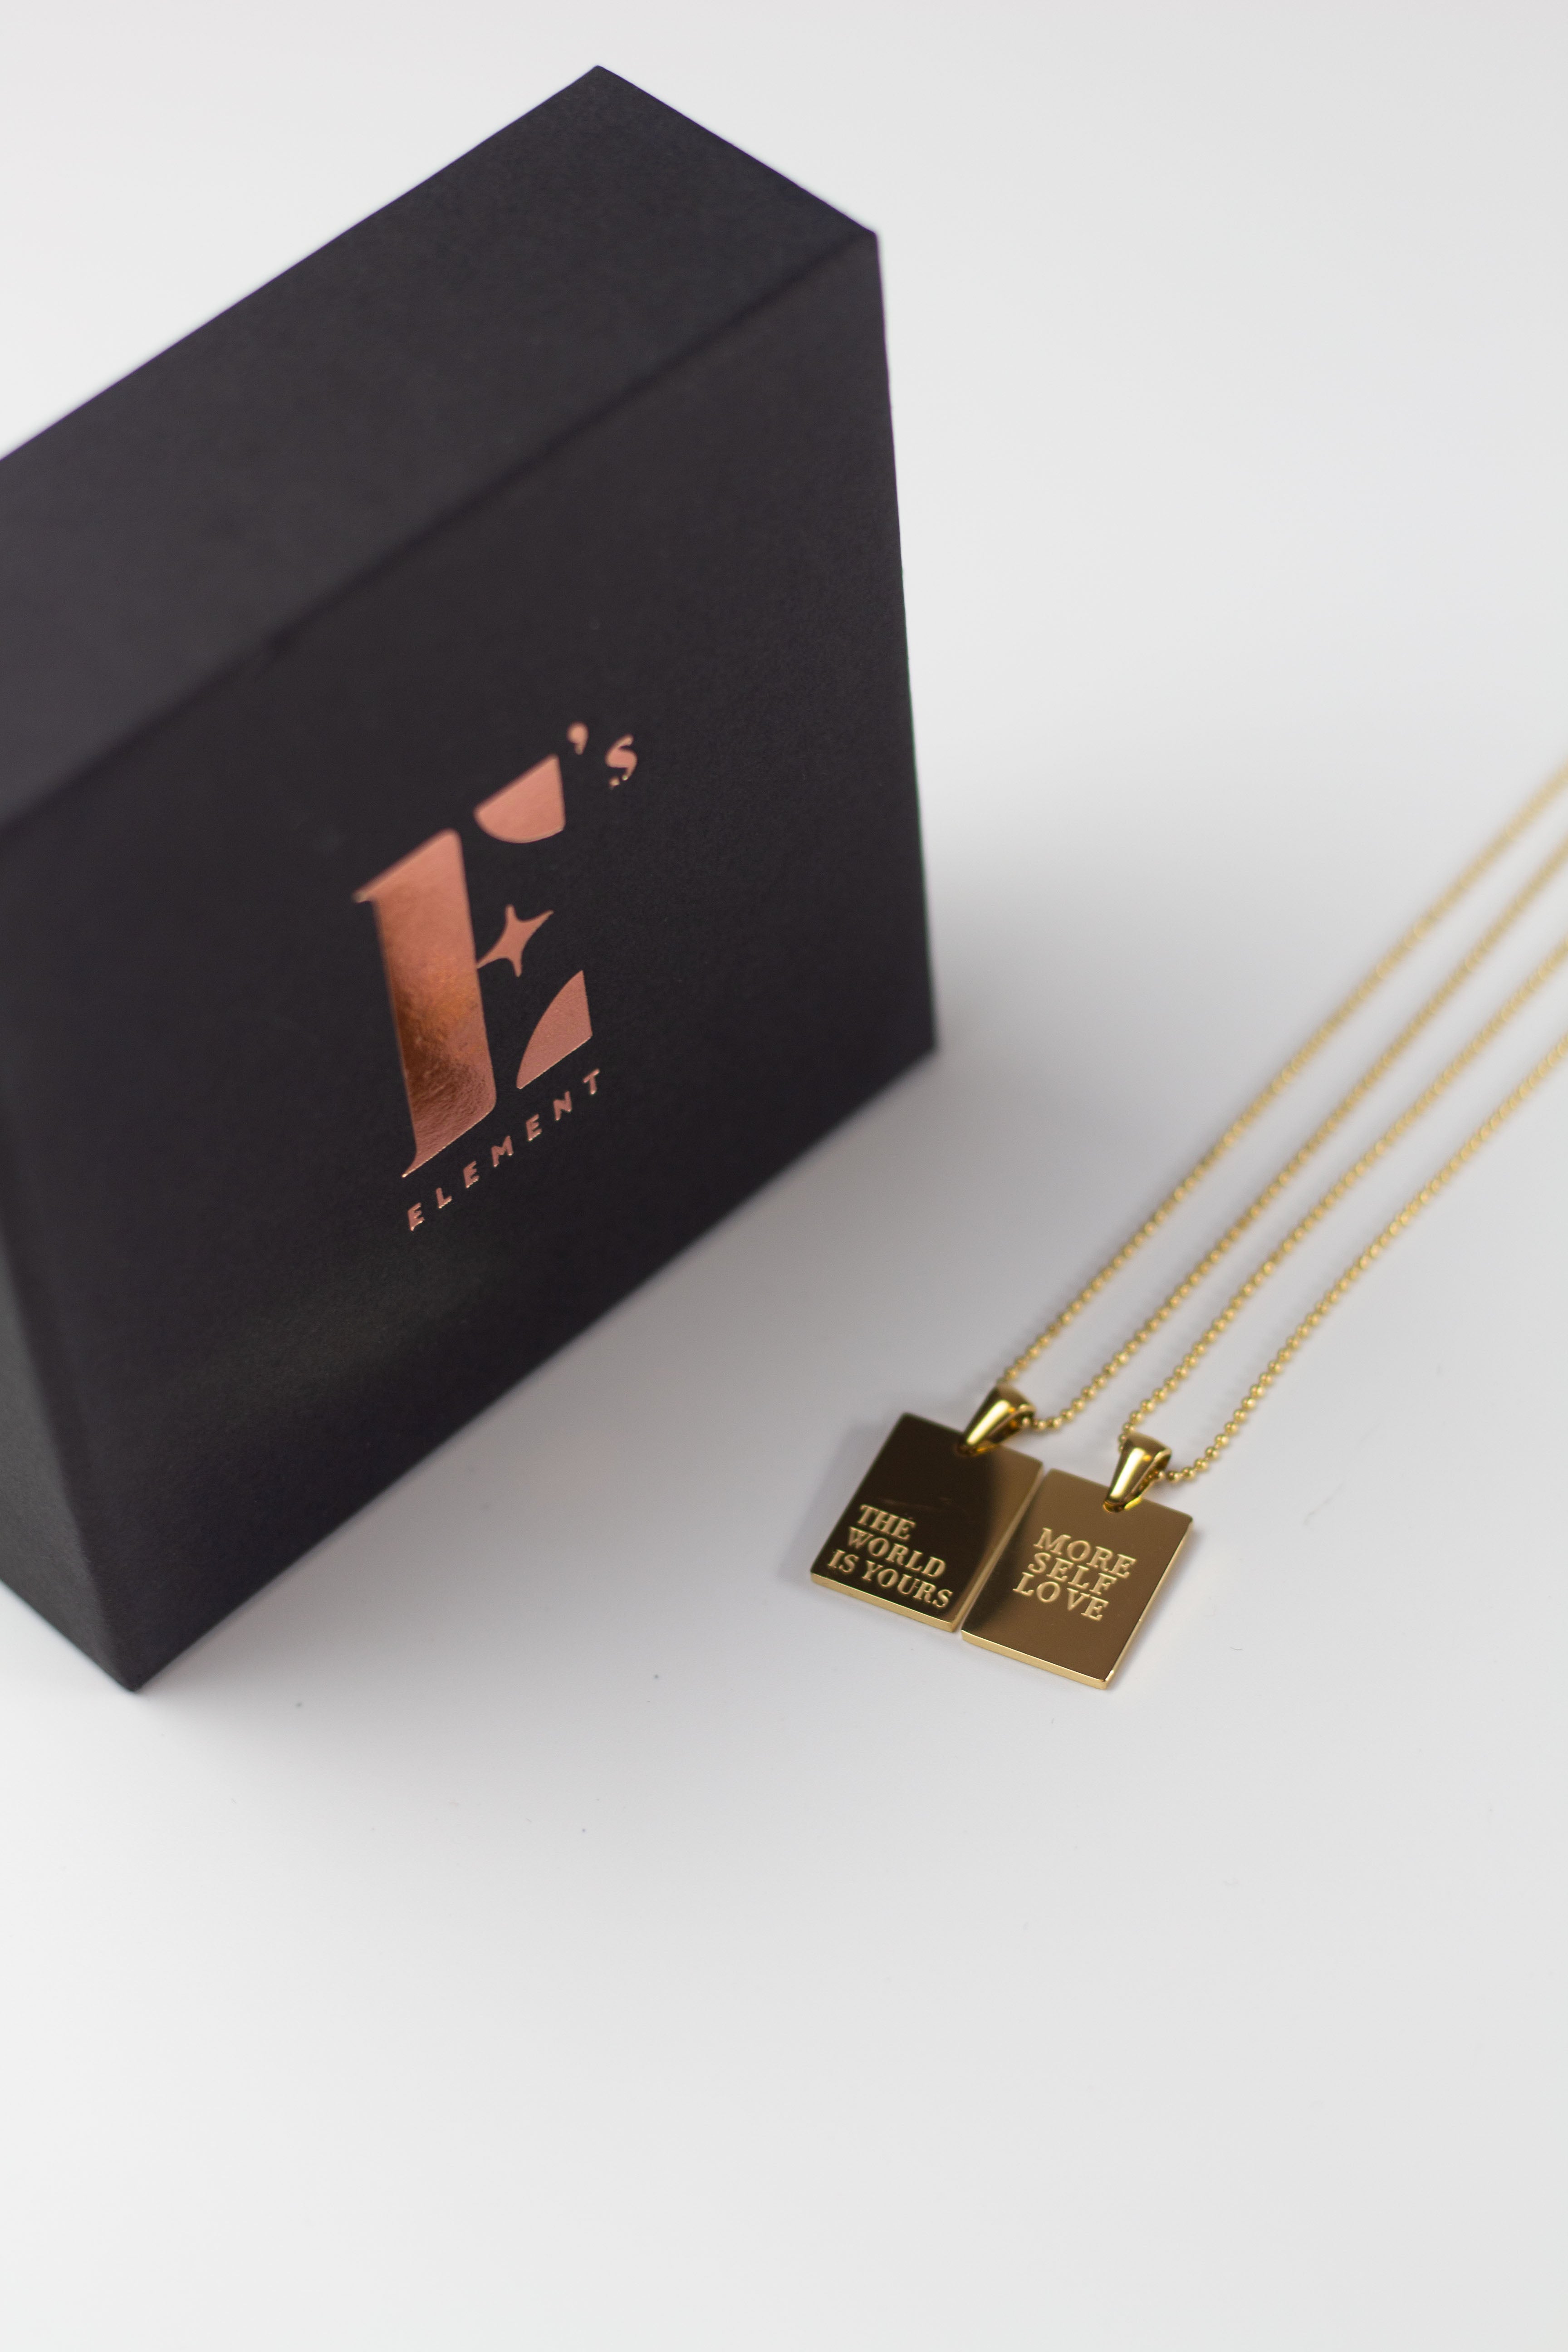 Two 18k gold stainless steel chain necklaces placed side-by-side. One of the necklaces is engraved with the words "THE WORLD IS YOUIRS" and the other with the words "MORE SELF LOVE". E's Element "The World Is Yours" Chain Necklace by E's Element.